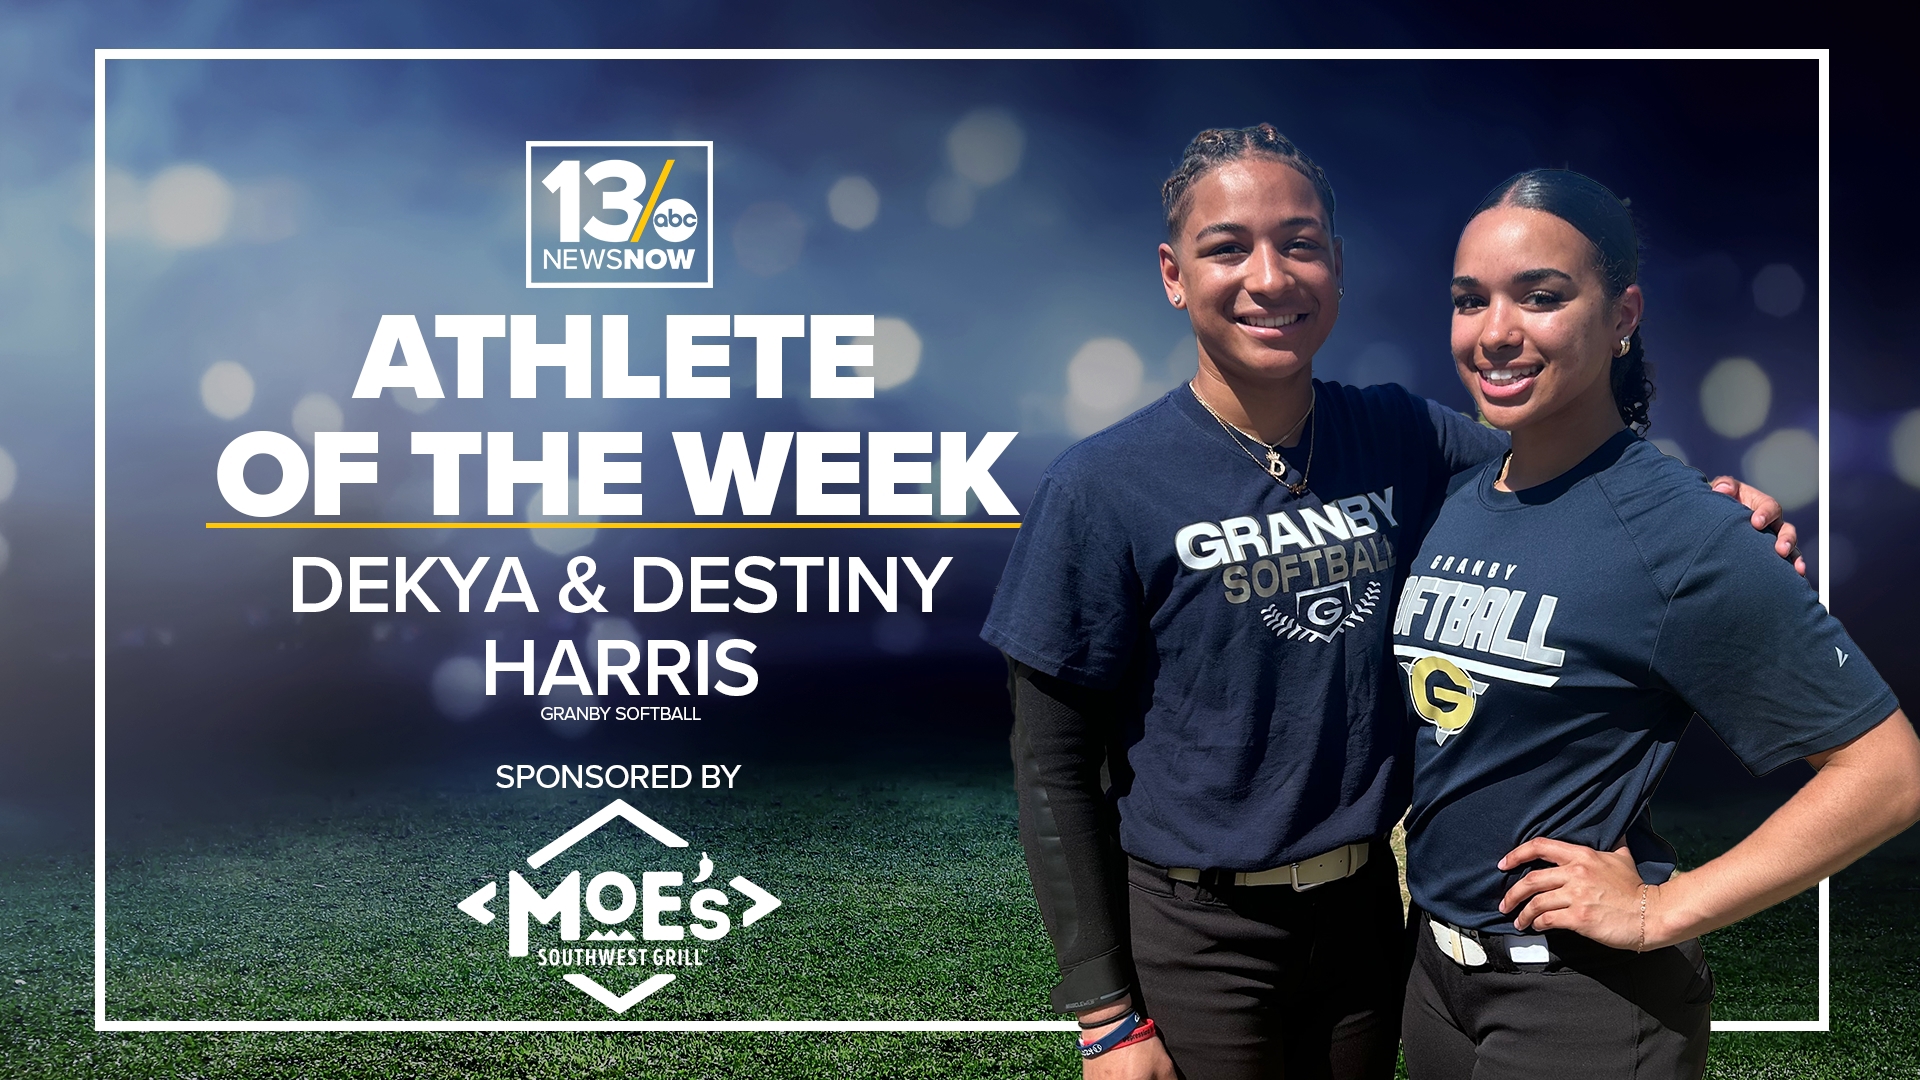 Their love of softball comes from their parents who originally met while playing the sport in the Navy.